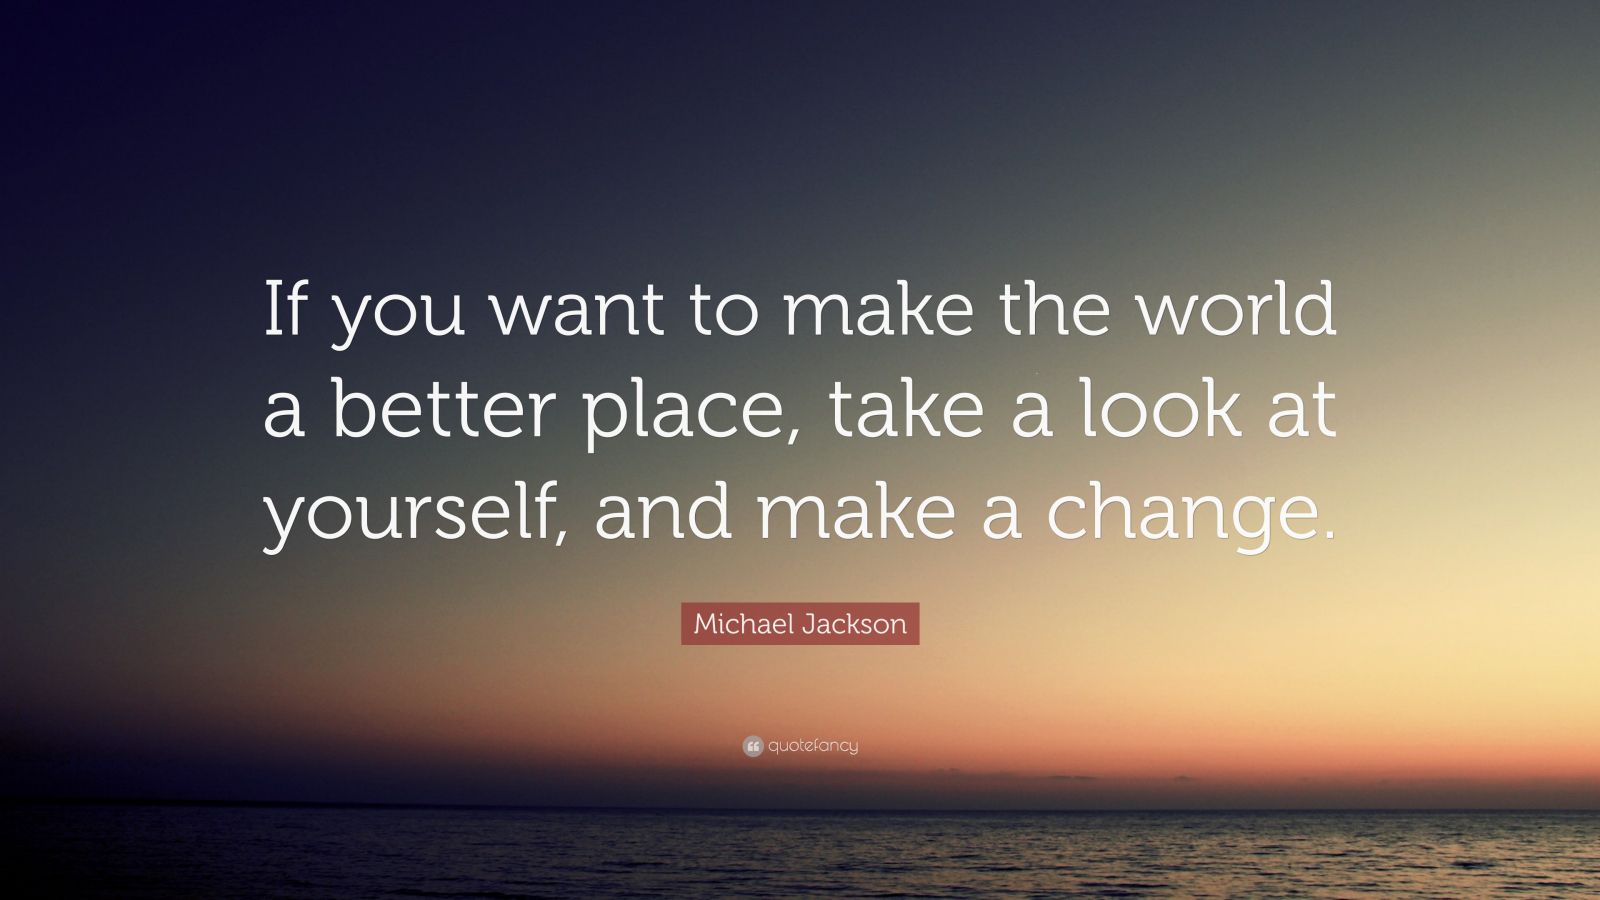 Michael Jackson Quote: “If you want to make the world a better place, take a look at ...